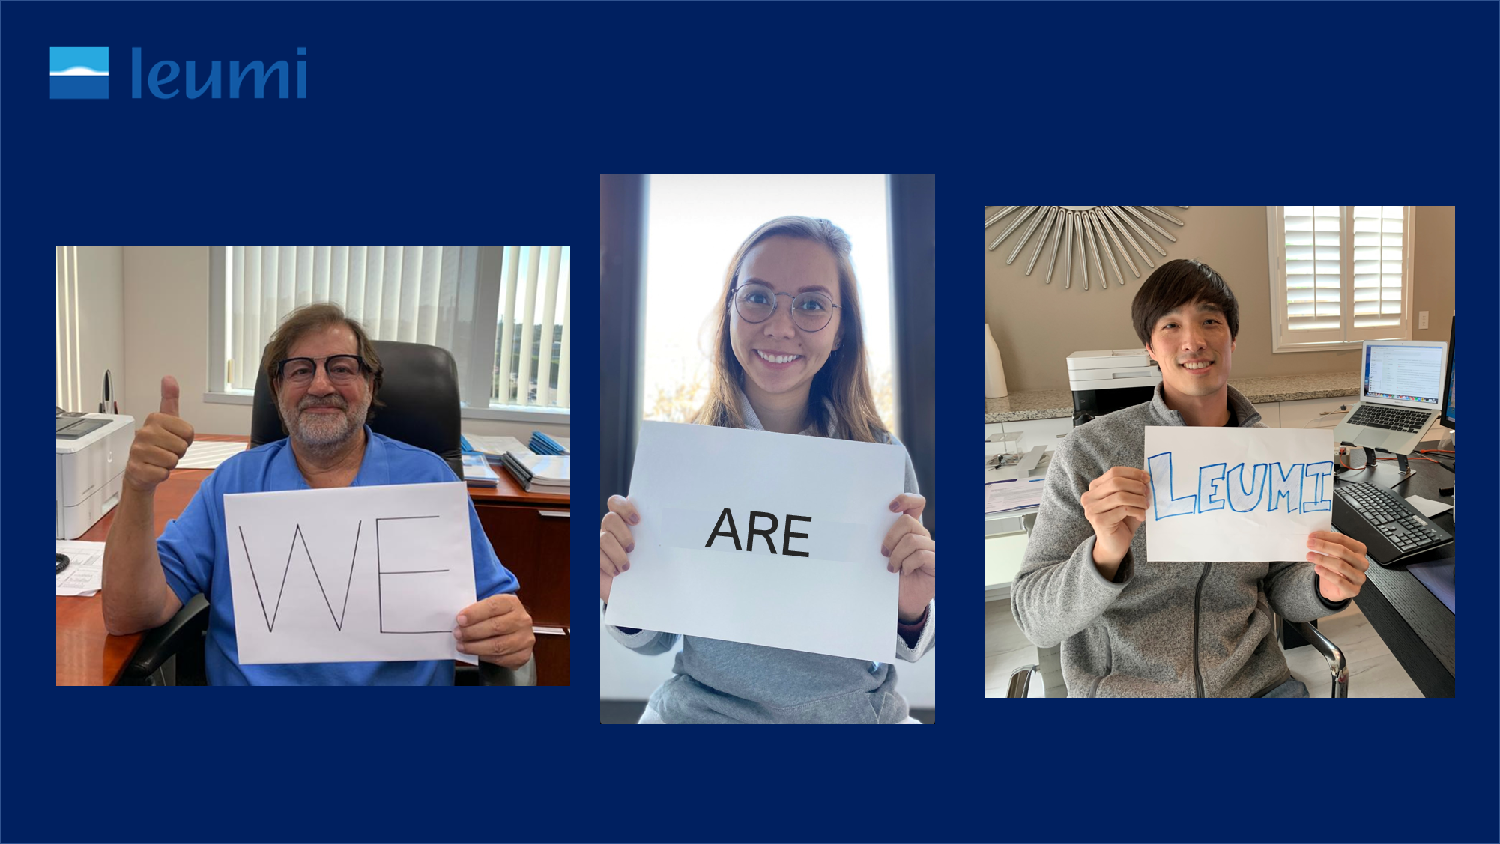 Employees show off their Leumi pride while working remotely during the COVID-19 pandemic. 